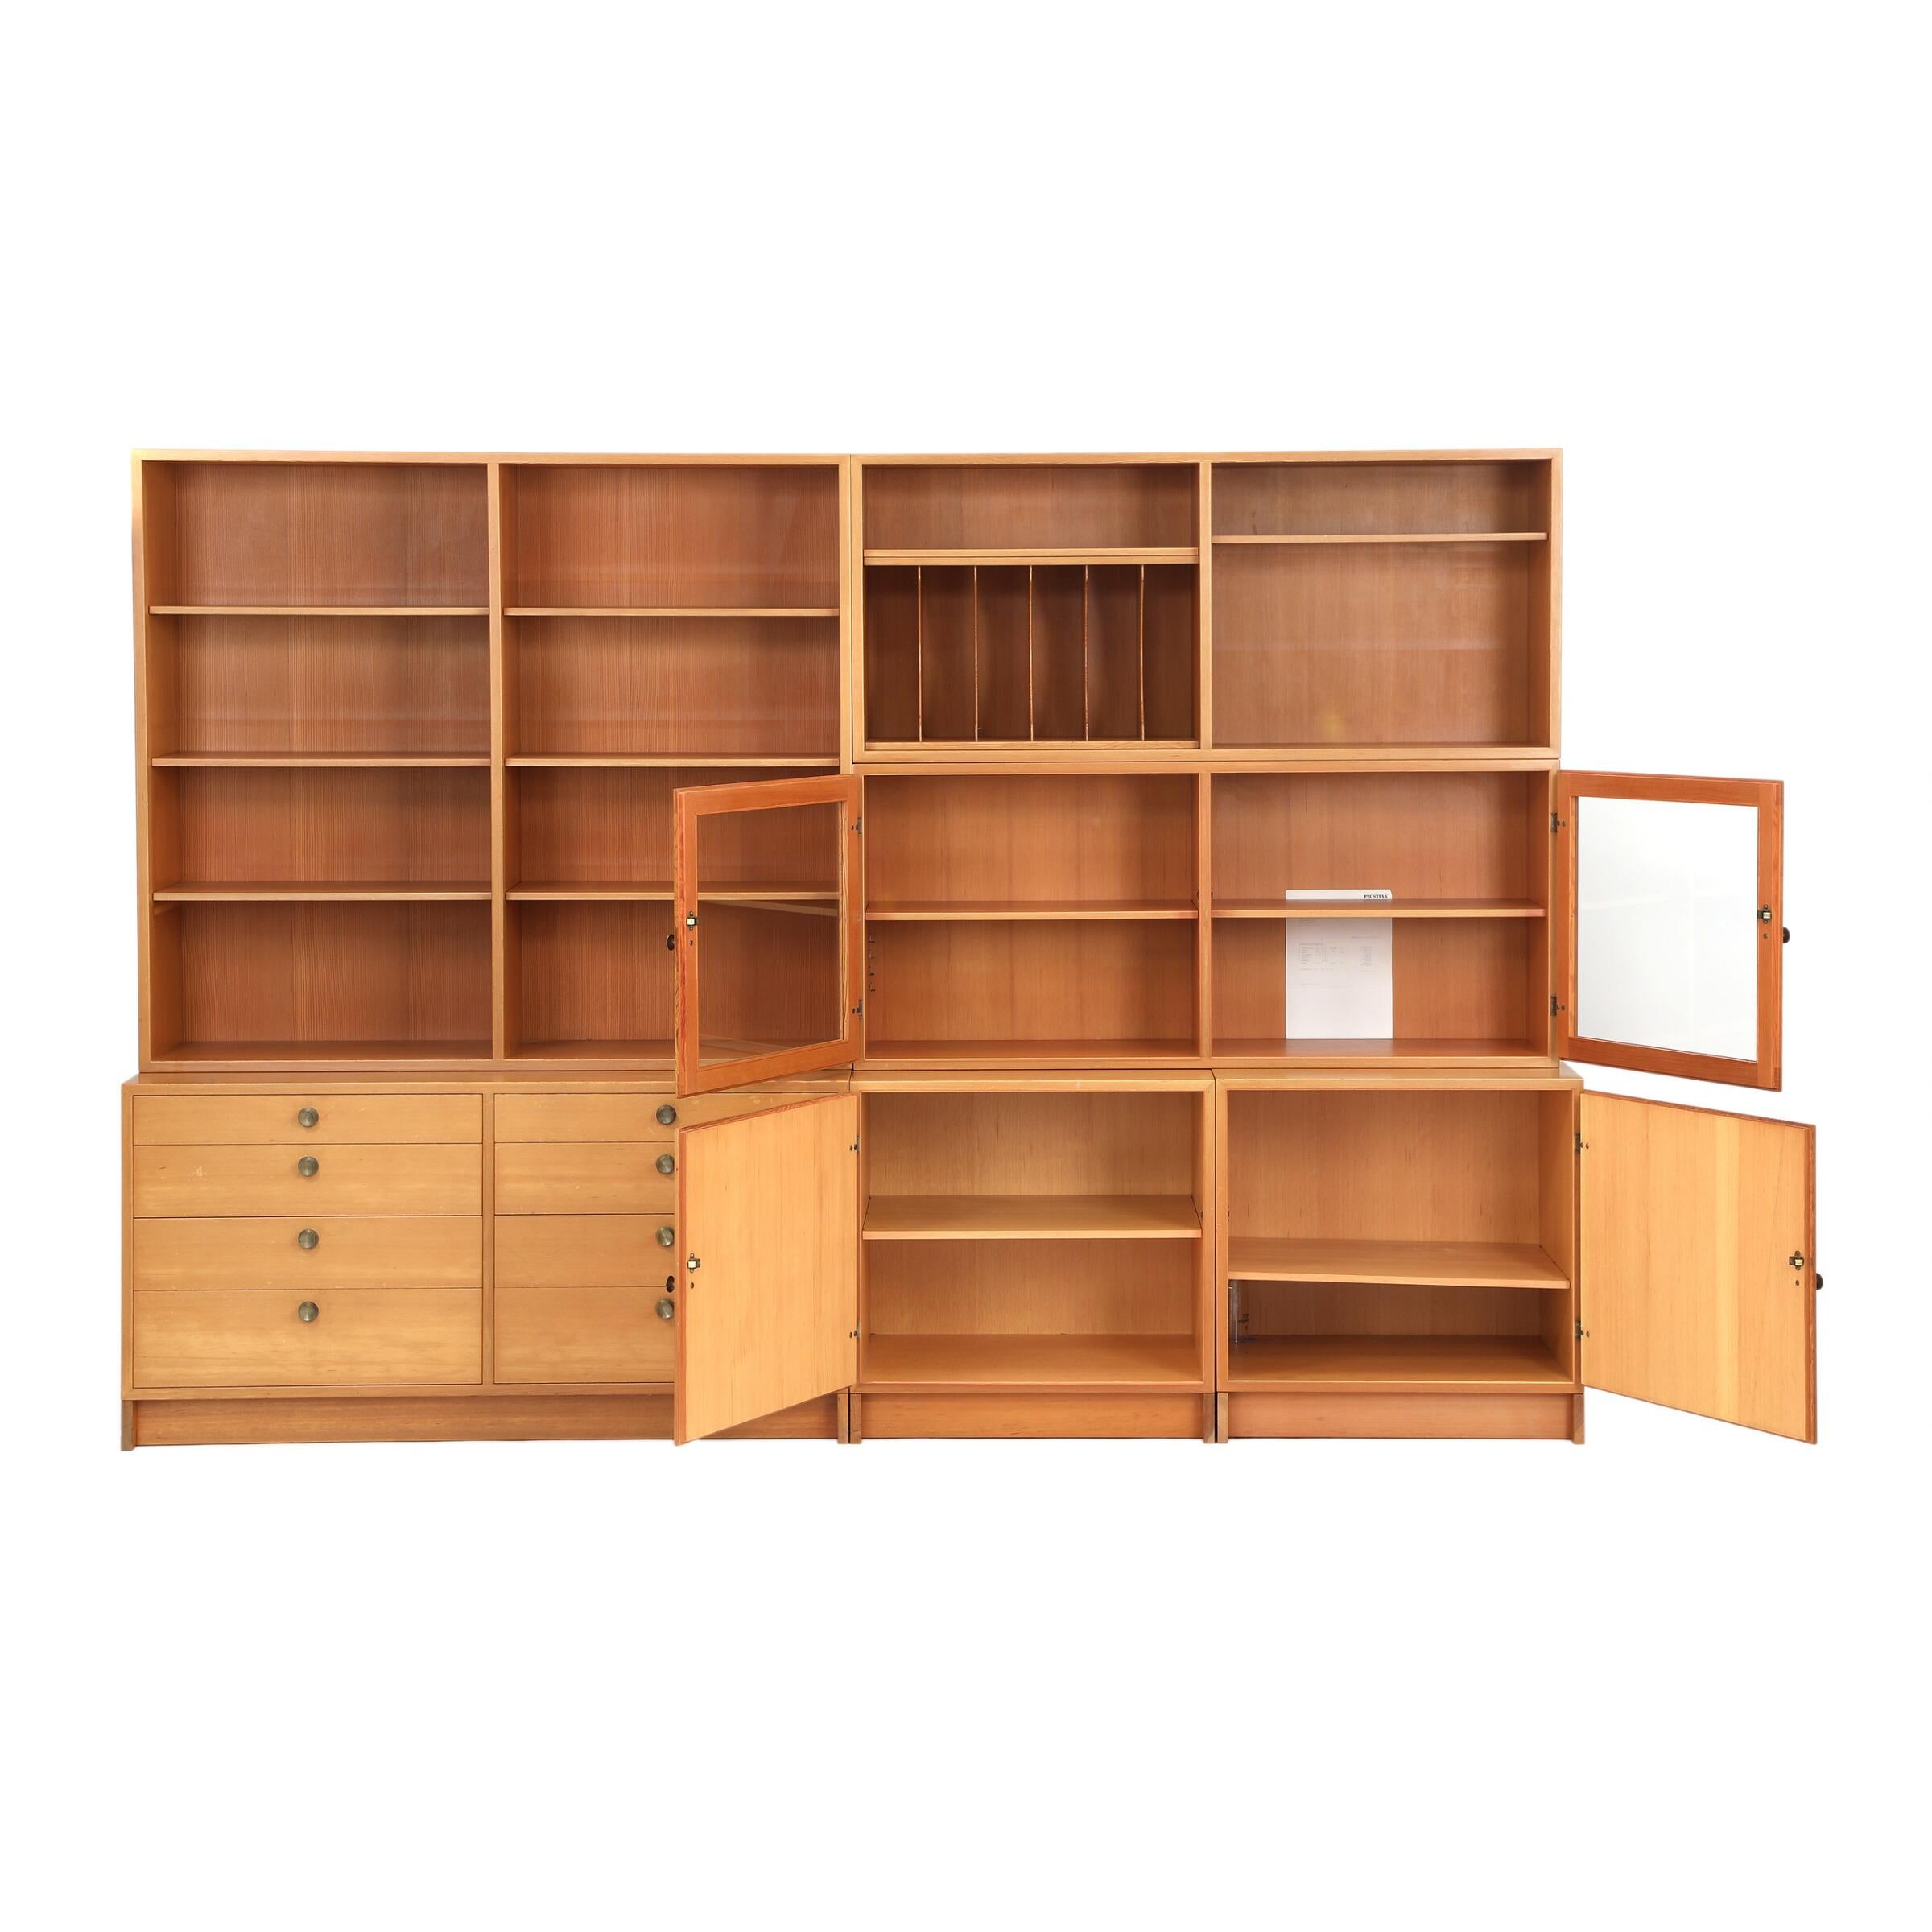 Wall unit of Oregon pine, consisting of three lower sections, hereof two with doors and one with drawers and three upper sections with show case and adjustable shelves. Handles and fitting of brass. Manufactured by Karl Andersson & Söner,